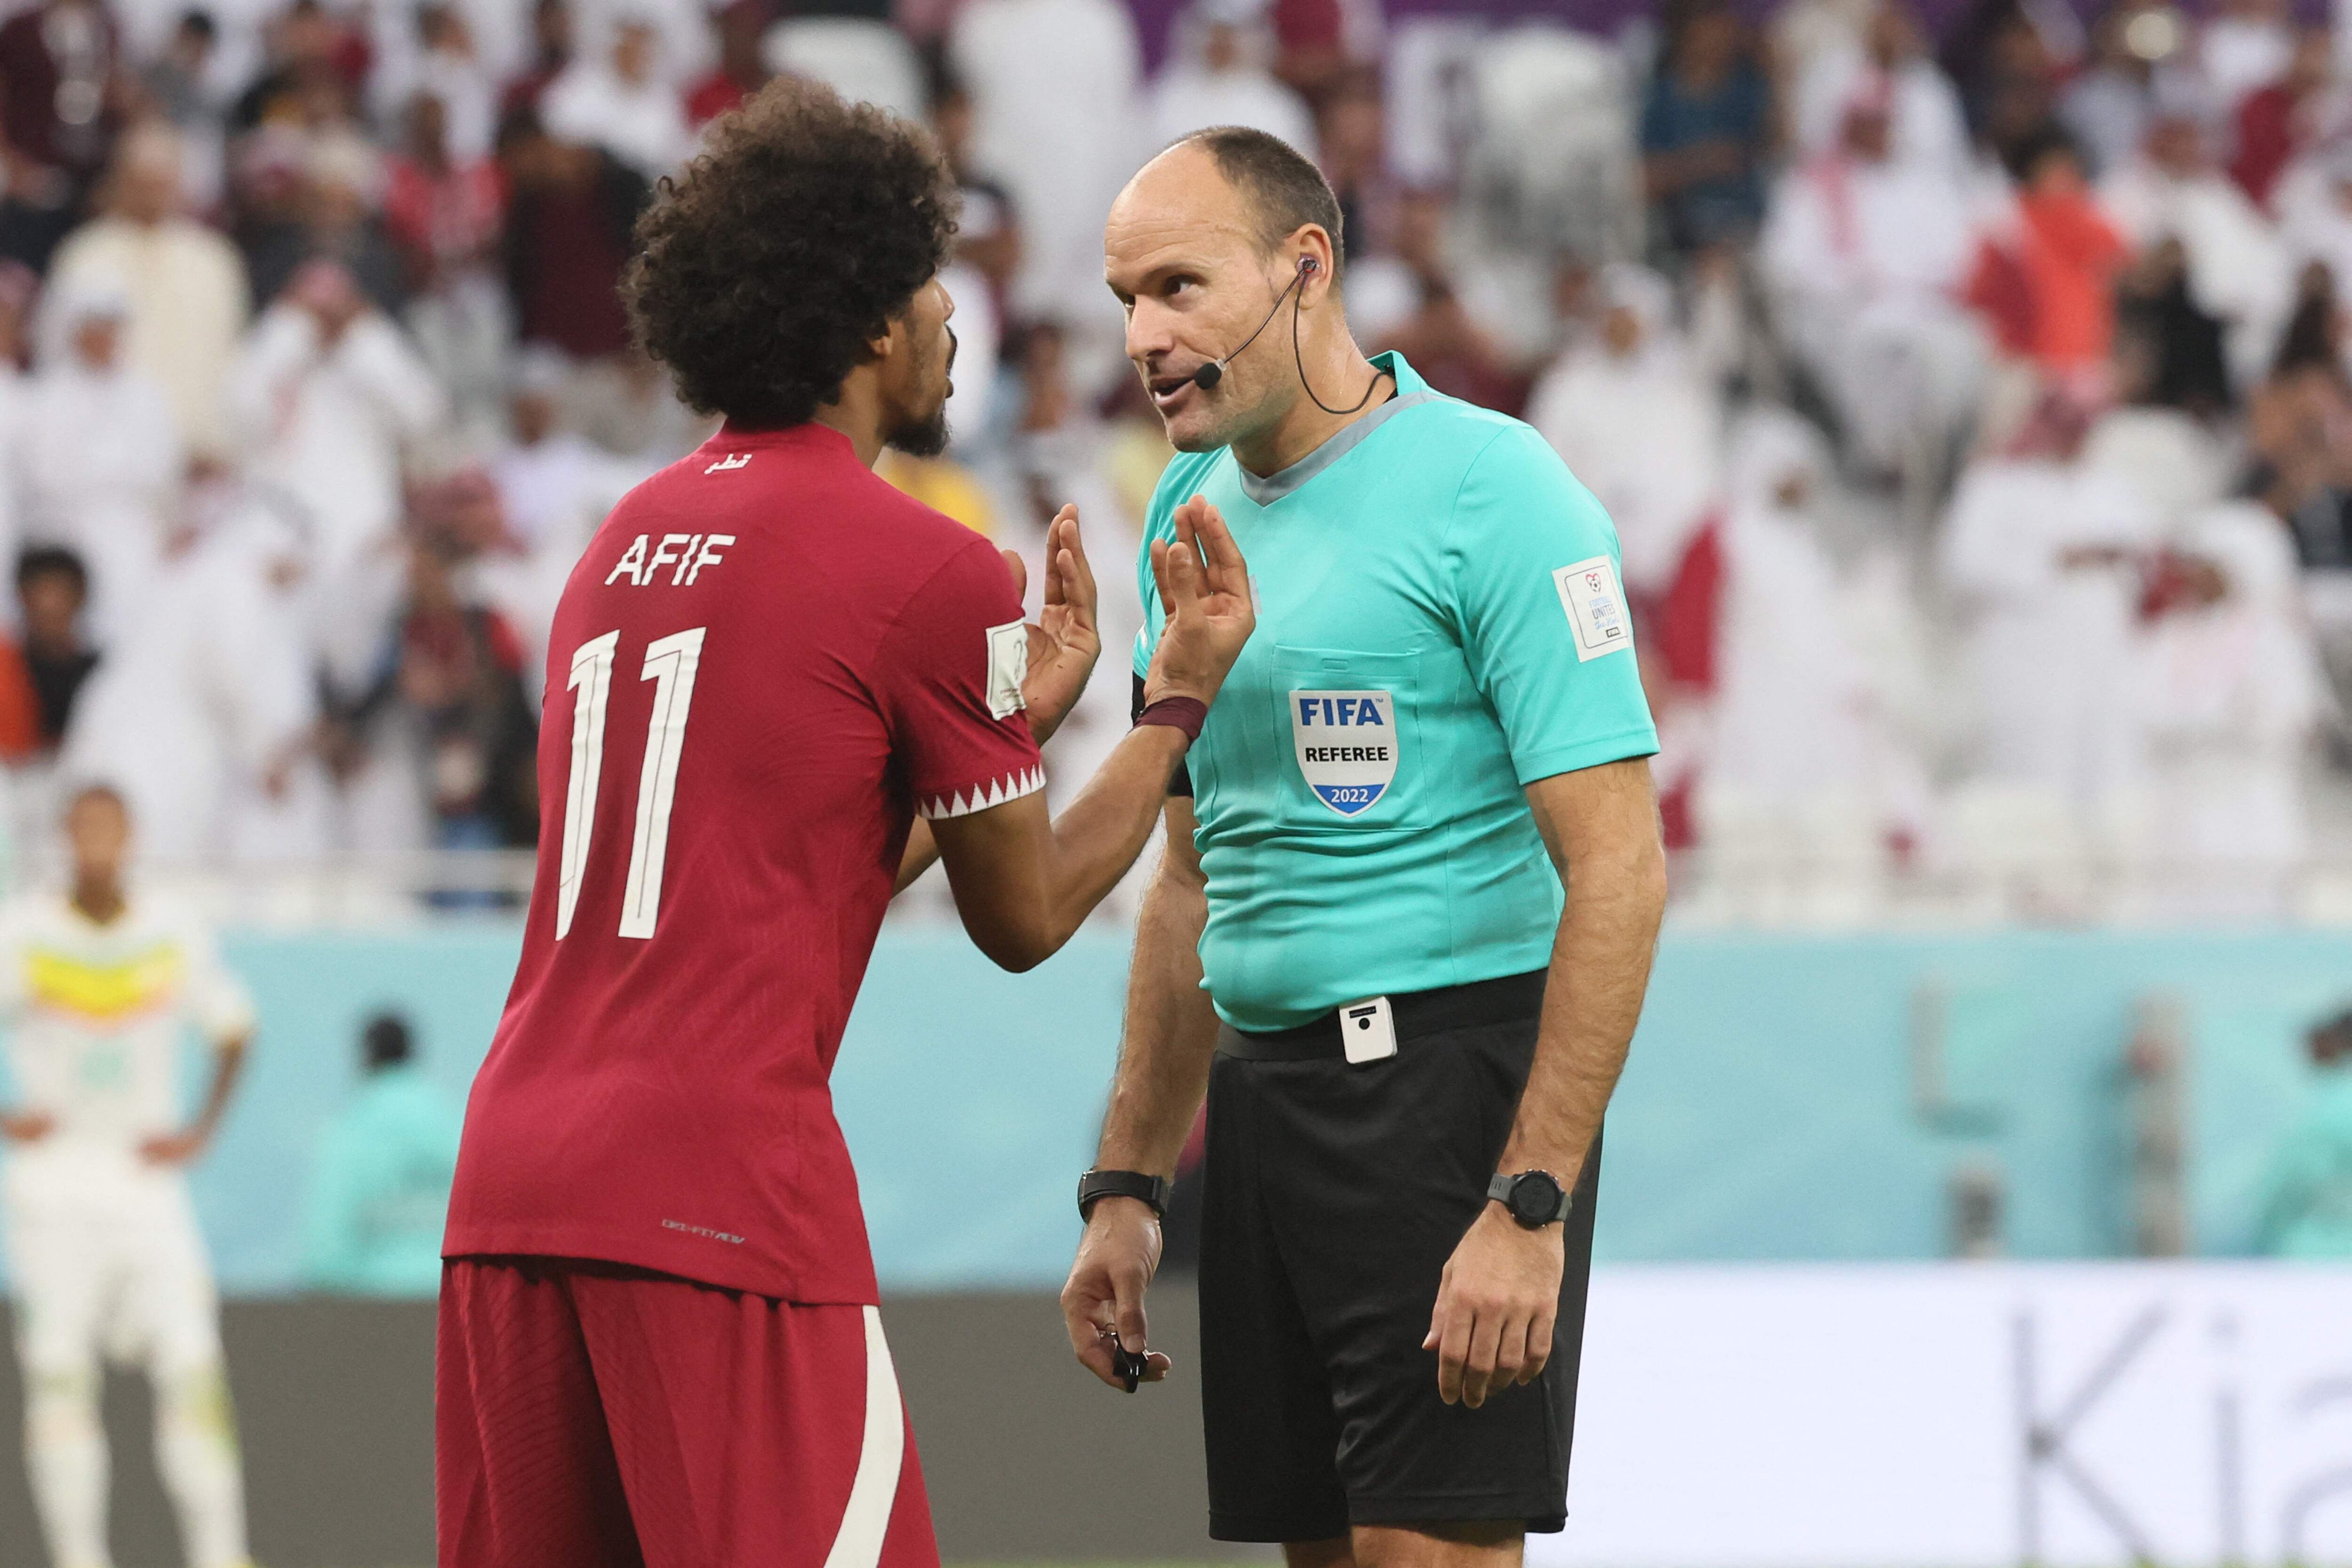 Qatar's forward #11 Akram Afif (L) appeals for a penalty to Spanish referee Antonio Mateu during the Qatar 2022 World Cup Group A football match between Qatar and Senegal at the Al-Thumama Stadium in Doha on November 25, 2022. (Photo by KARIM JAAFAR / AFP)